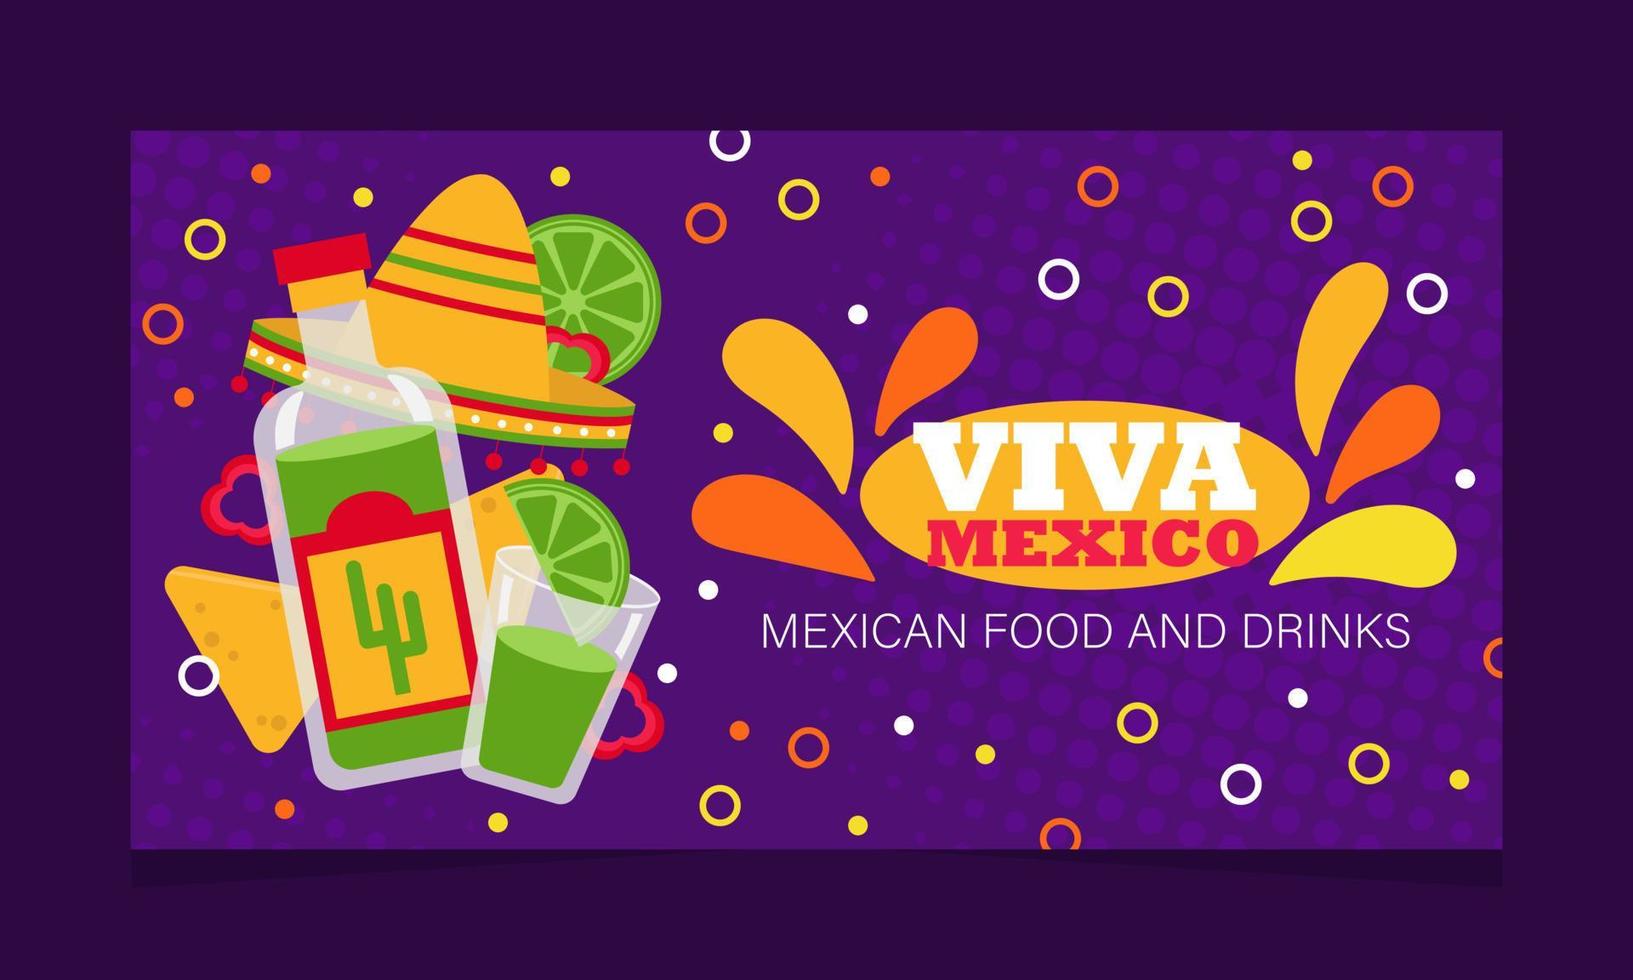 Viva mexico poster with tequila illustration. Vector promotion banner with national mexican drink and food.